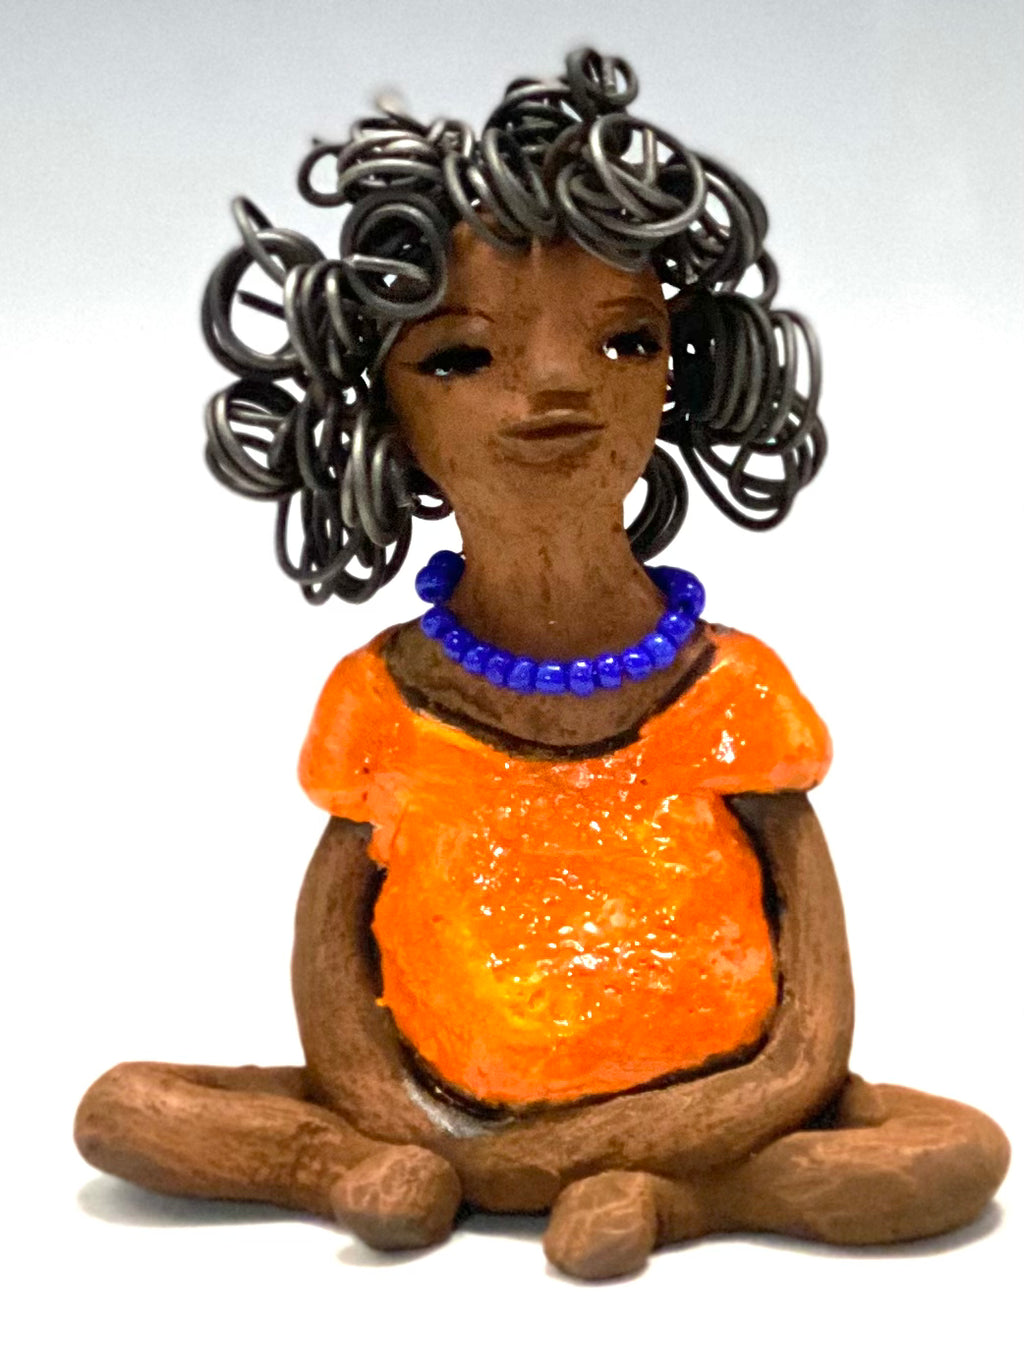 Asia stands 5" x 4" x 3.5" and weighs 8.75 ozs. She has a lovely honey brown complexion with cocoa brown lips. She has a really big curly hairstyle!  Asia has  beautiful a orange dress dress accented with a blue beaded necklace! . She has over 15 feet of 16 gauge wire for hair. It took over 2 hours just to do her hair! With  eyes wide opened, Asia has hope of finding a new home.